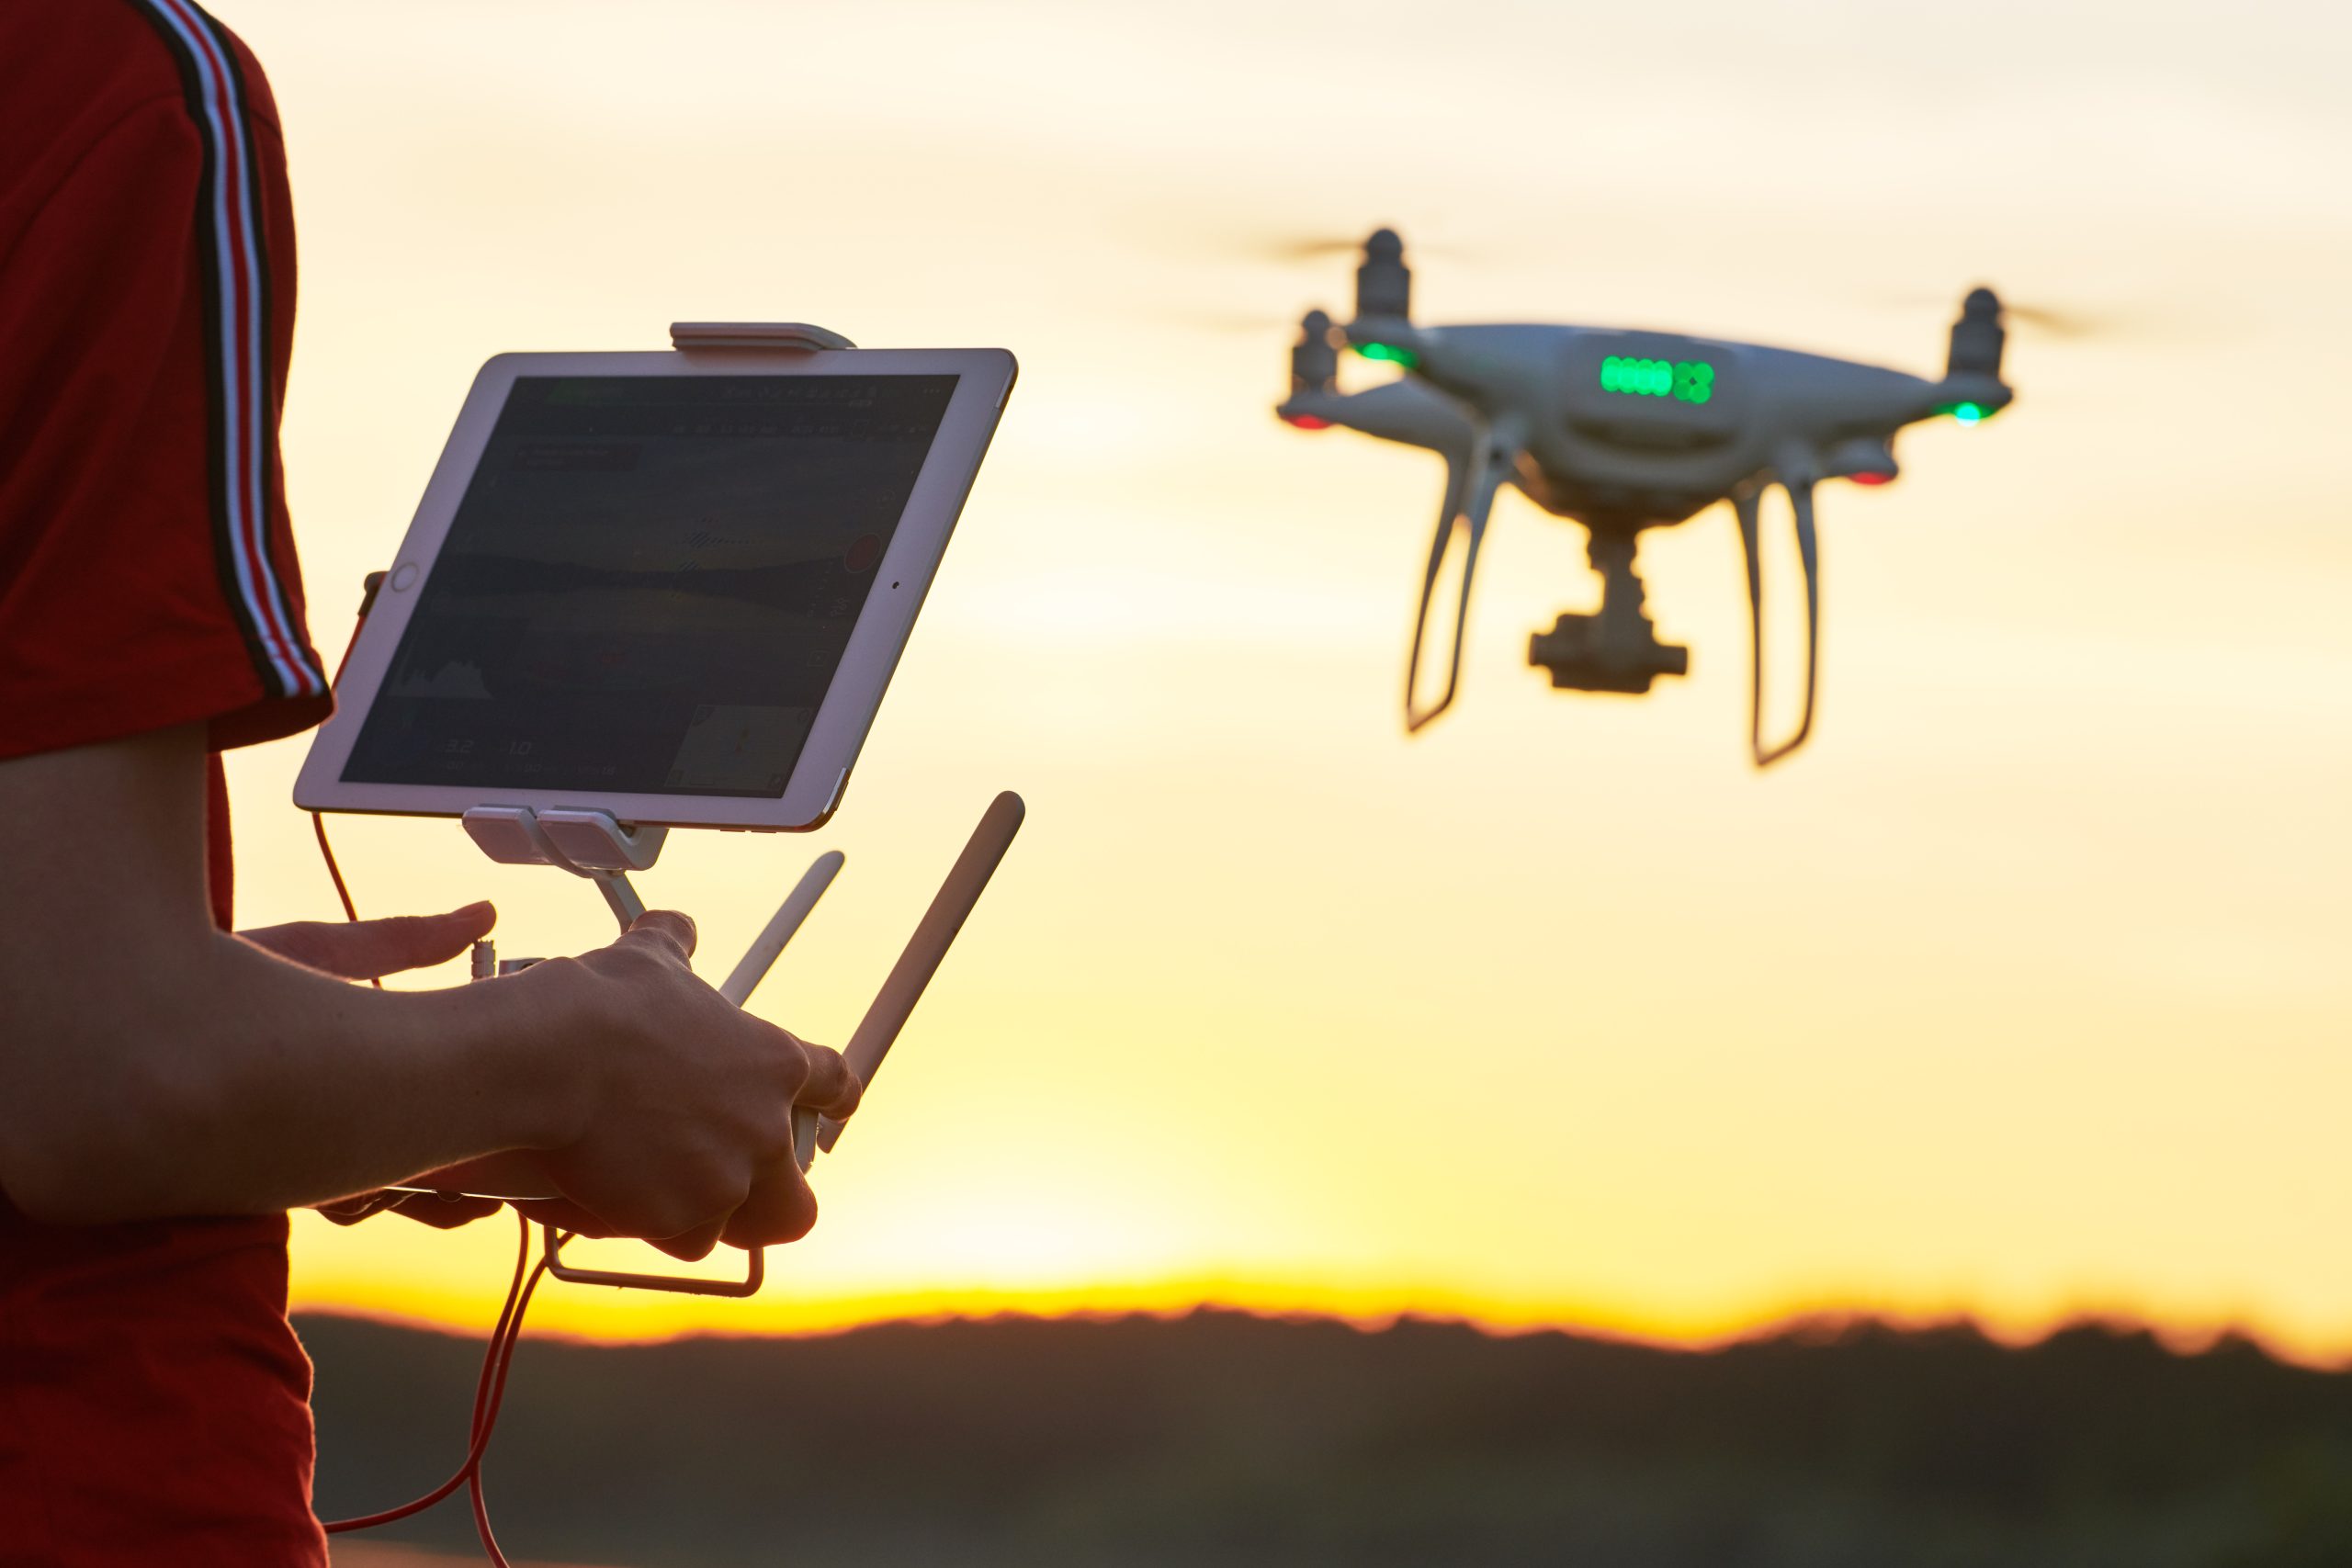 operator piloting flying copter drone at sunset. Focus on remote controller